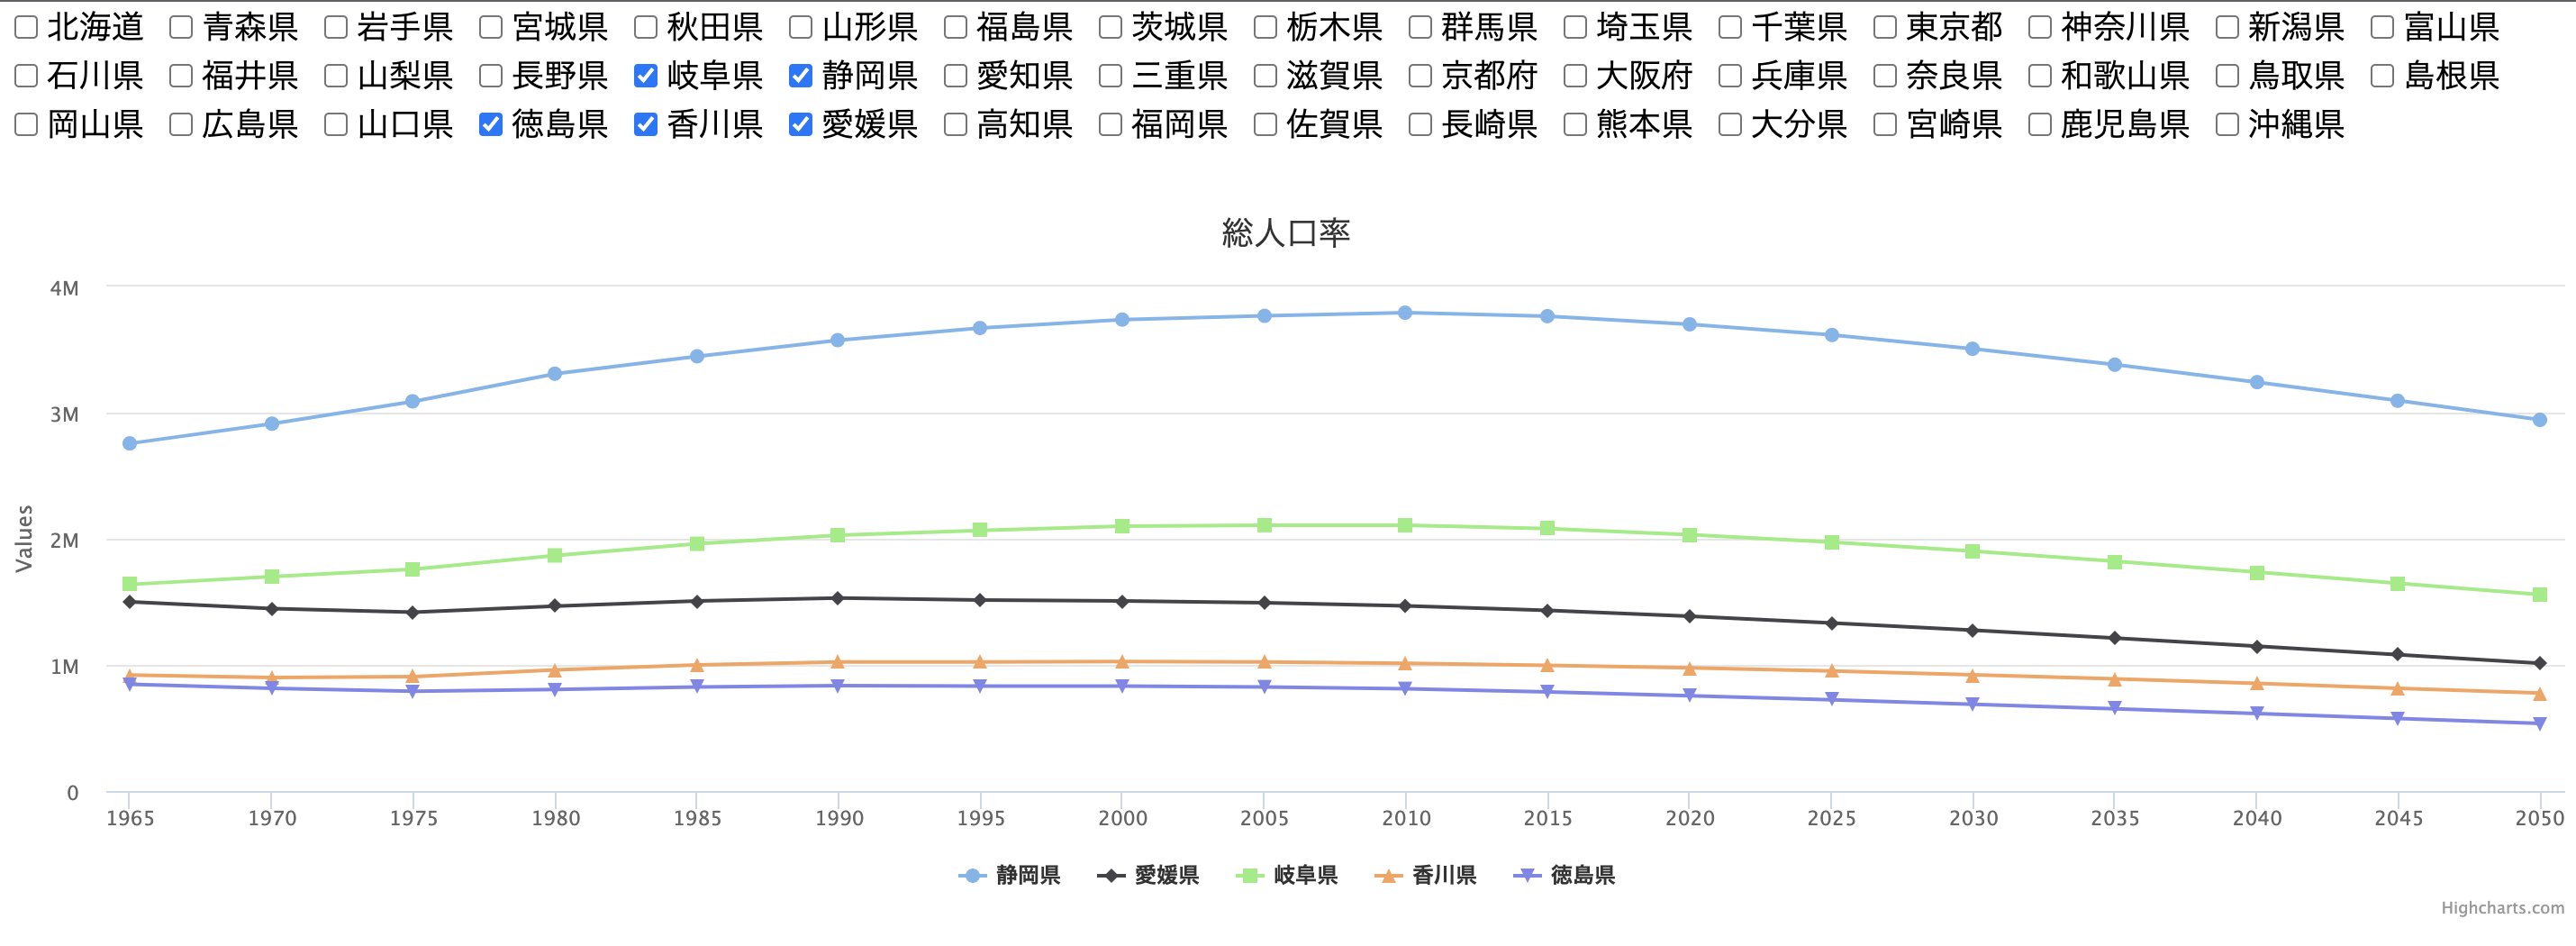 Japanese population graph by prefecture